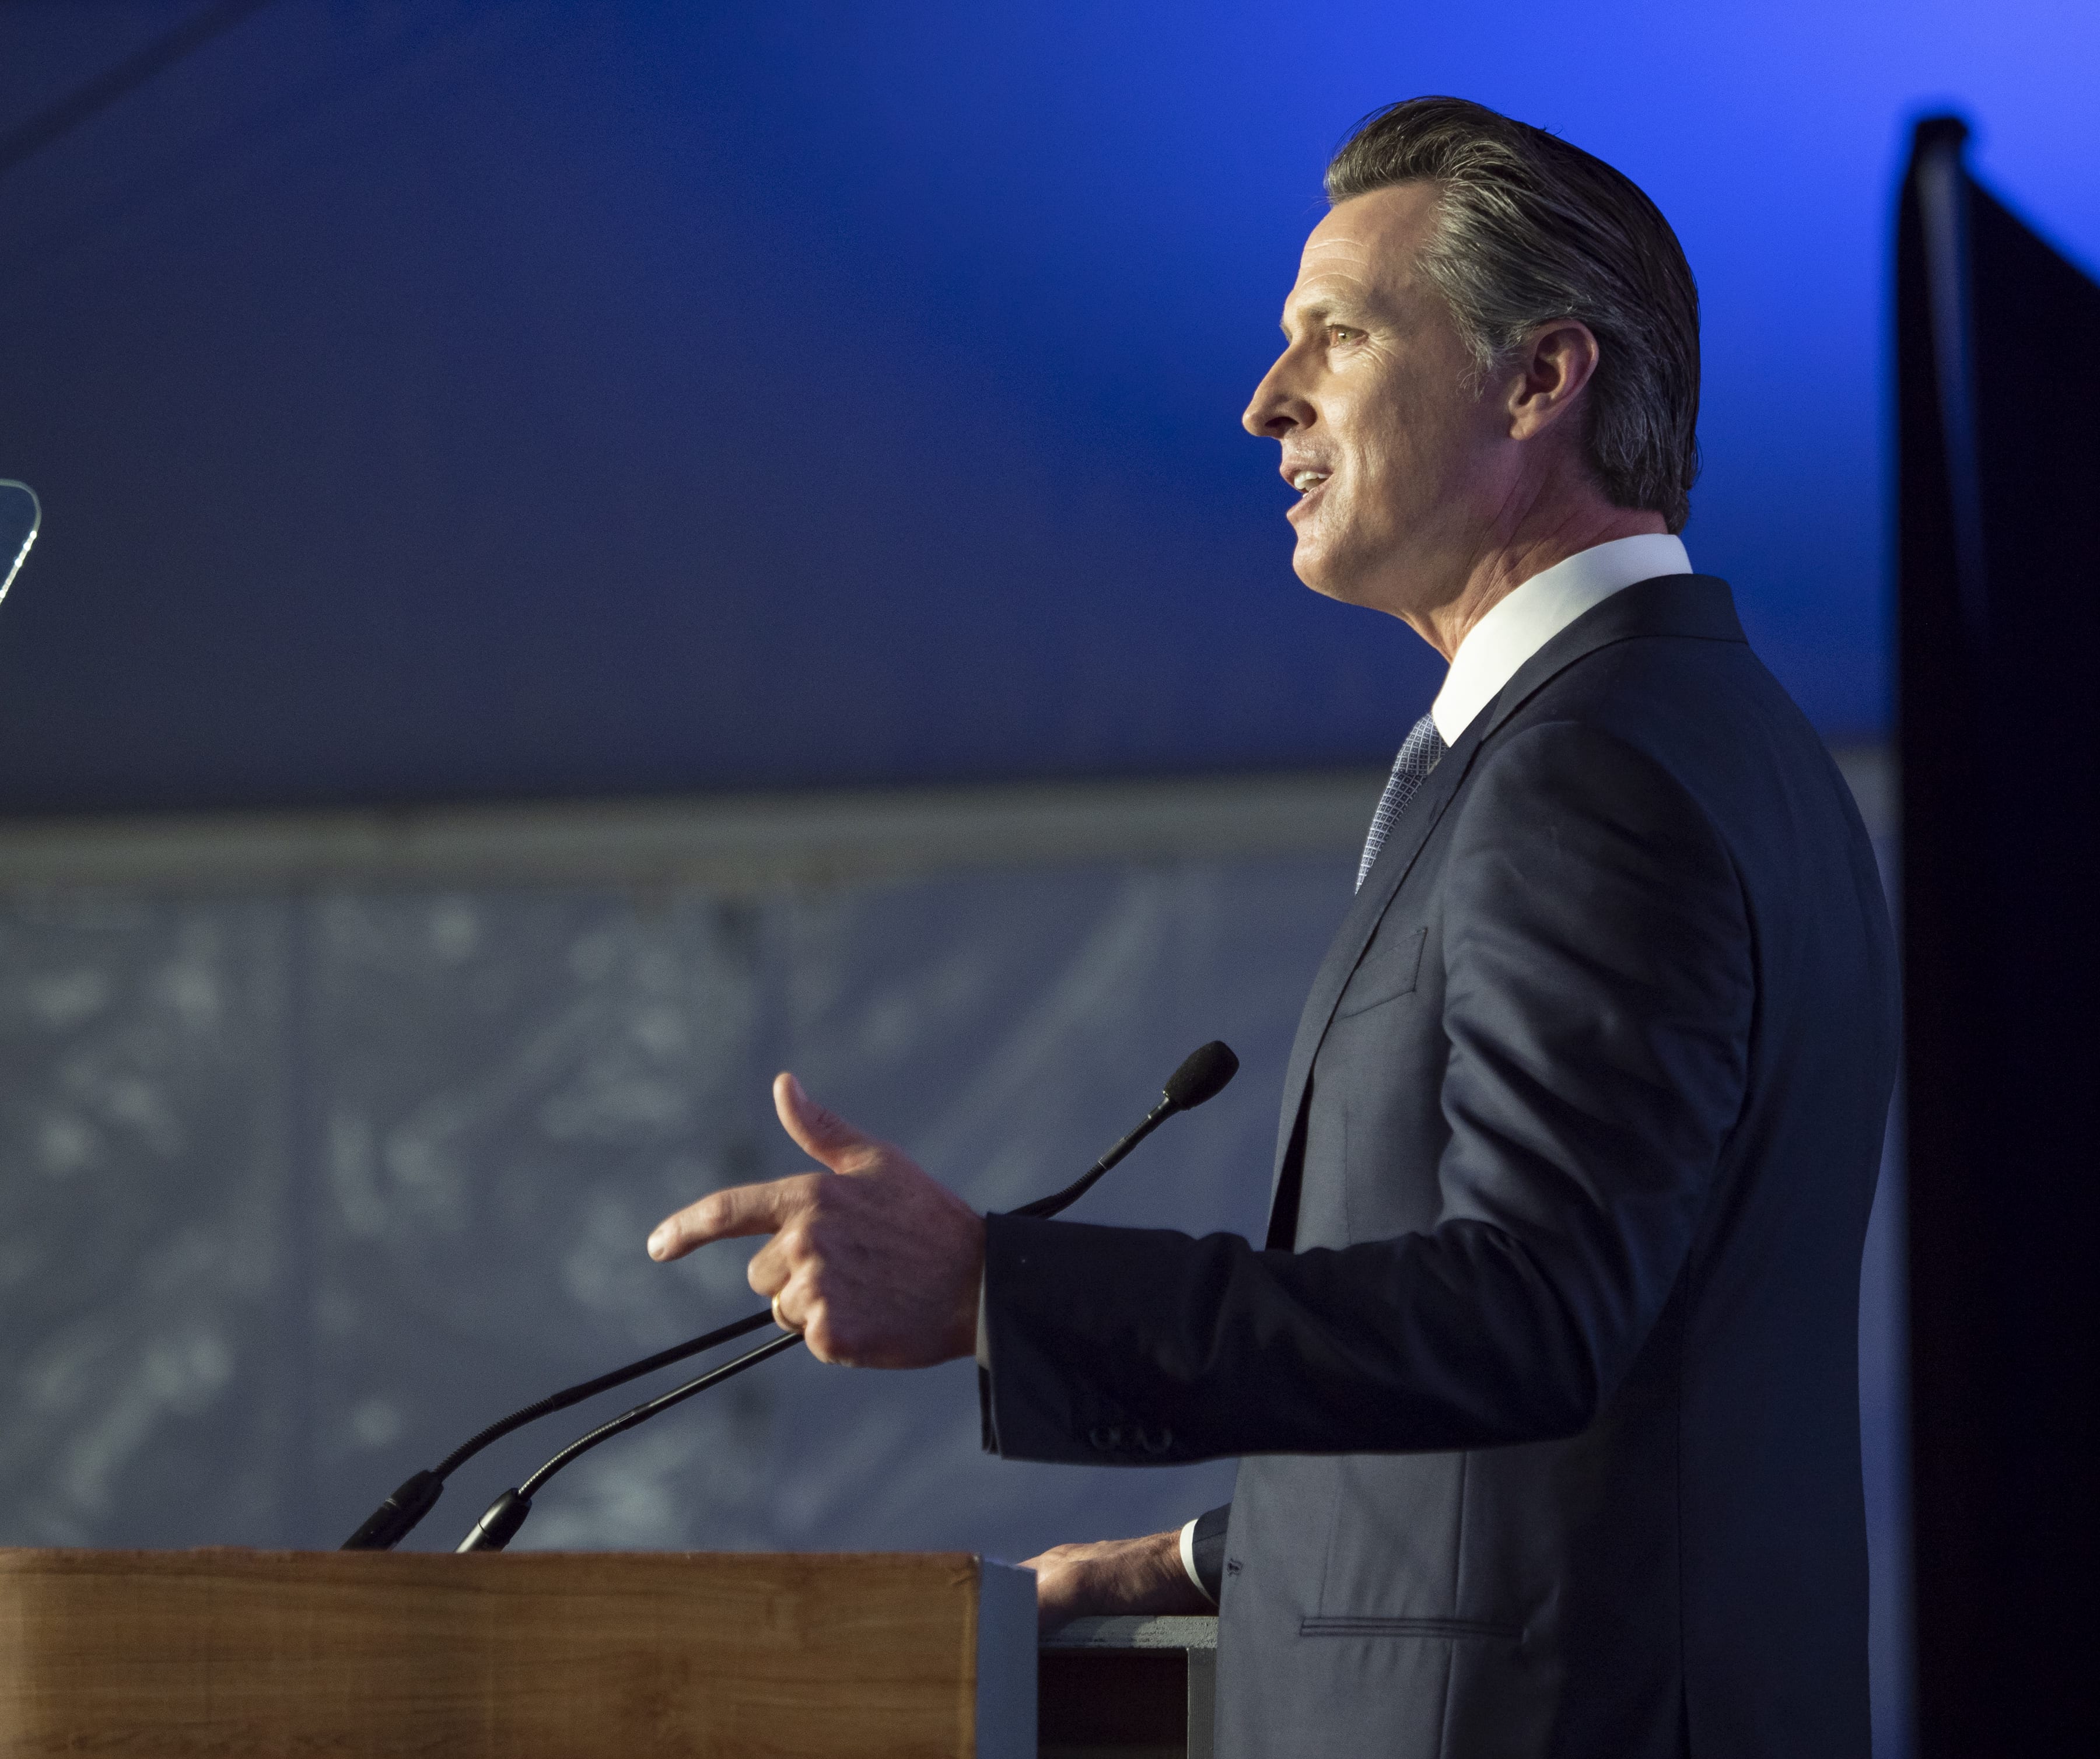 Governor Newsom delivers his inaugural address.